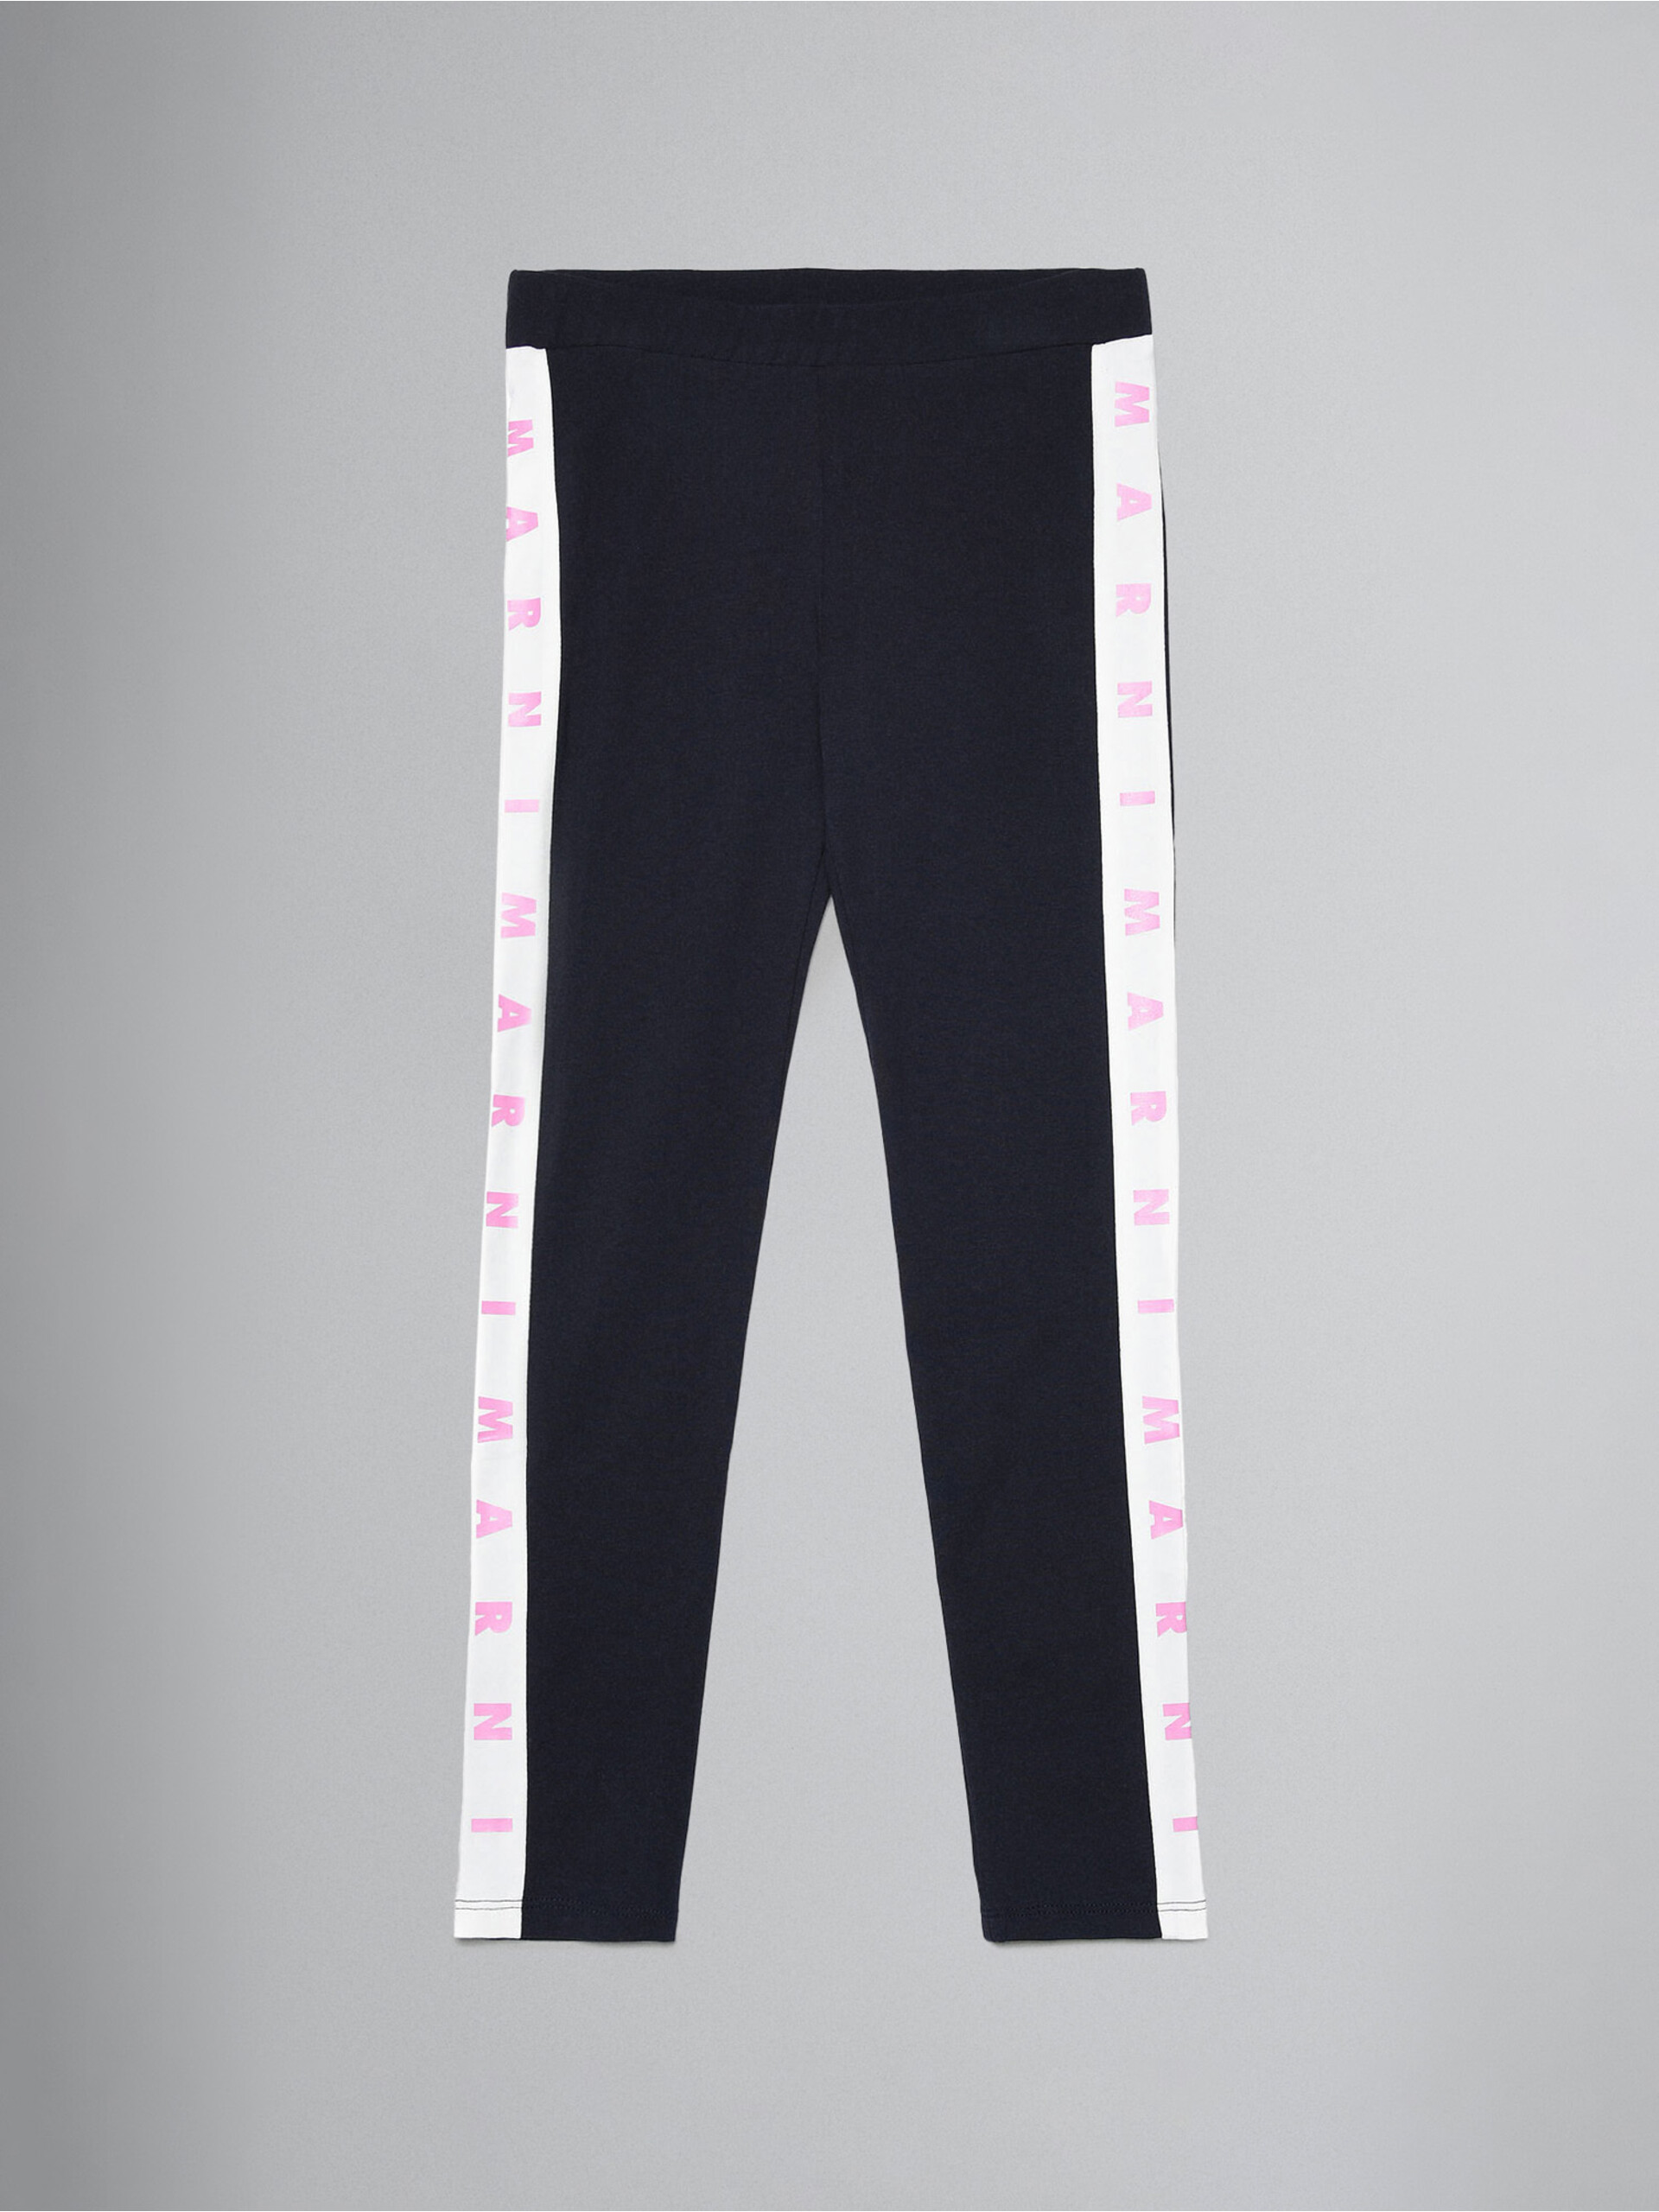 Navy blue leggings with logo bands - Pants - Image 1